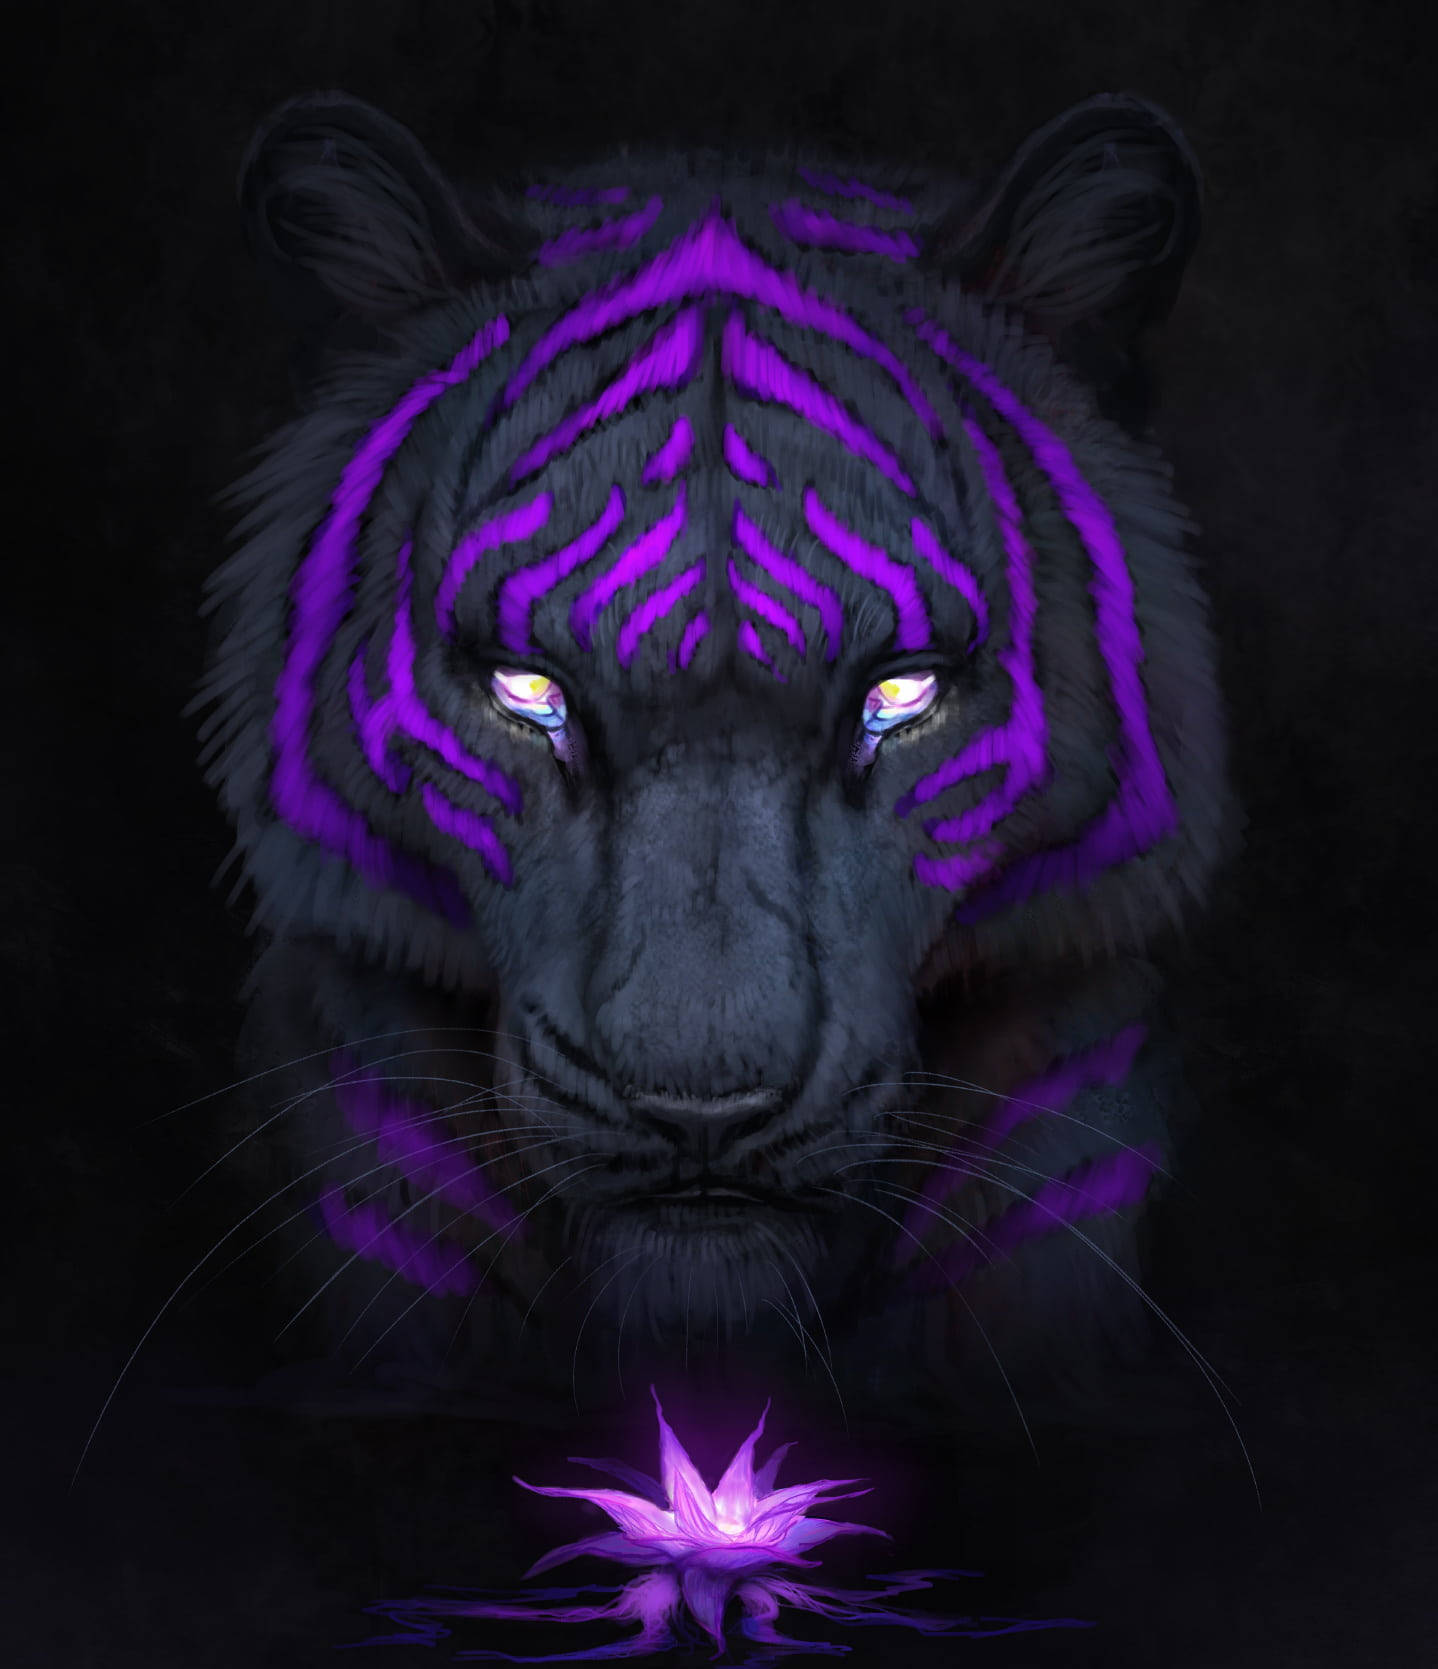 Majestic Tiger on a Black and Purple Backdrop Wallpaper